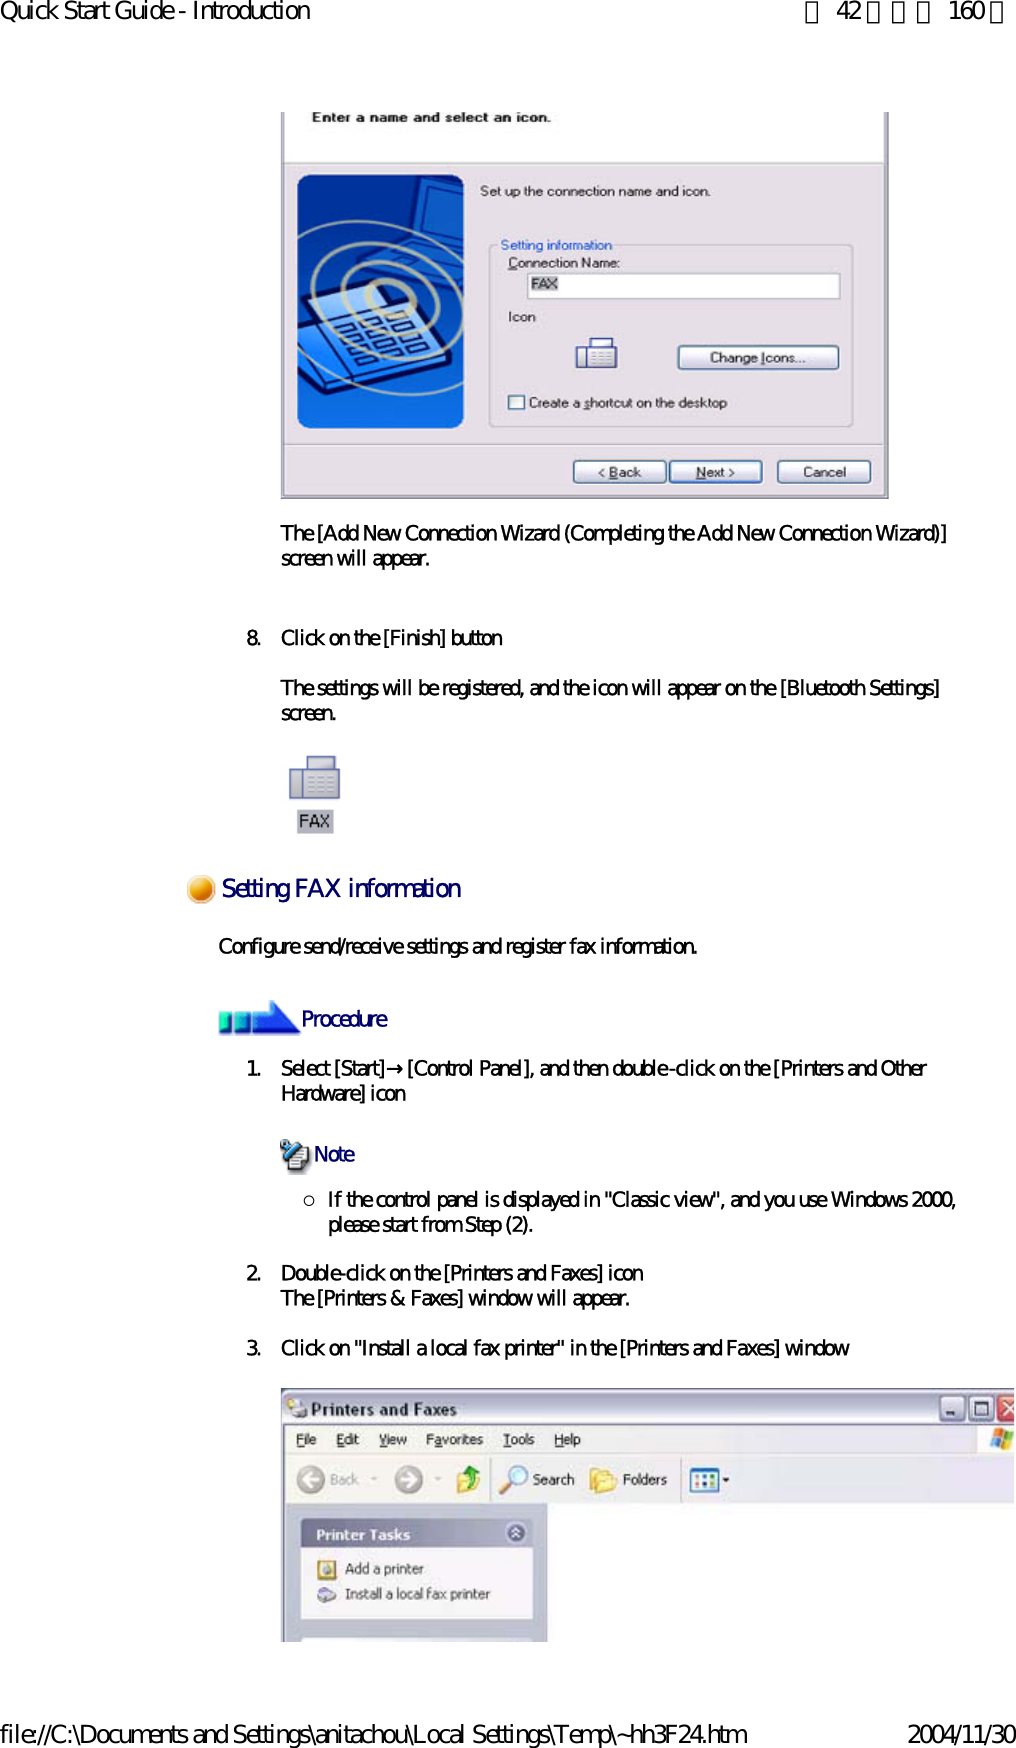 Quick Start Guide - Introduction 第 42 頁，共 160 頁file://C:\Documents and Settings\anitachou\Local Settings\Temp\~hh3F24.htm 2004/11/30The [Add New Connection Wizard (Completing the Add New Connection Wizard)] screen will appear.8. Click on the [Finish] buttonThe settings will be registered, and the icon will appear on the [Bluetooth Settings] screen. Configure send/receive settings and register fax information. 1. Select [Start]→[Control Panel], and then double-click on the [Printers and Other Hardware] icon{If the control panel is displayed in &quot;Classic view&quot;, and you use Windows 2000, please start from Step (2). 2. Double-click on the [Printers and Faxes] iconThe [Printers &amp; Faxes] window will appear.3. Click on &quot;Install a local fax printer&quot; in the [Printers and Faxes] windowSetting FAX informationProcedureNote